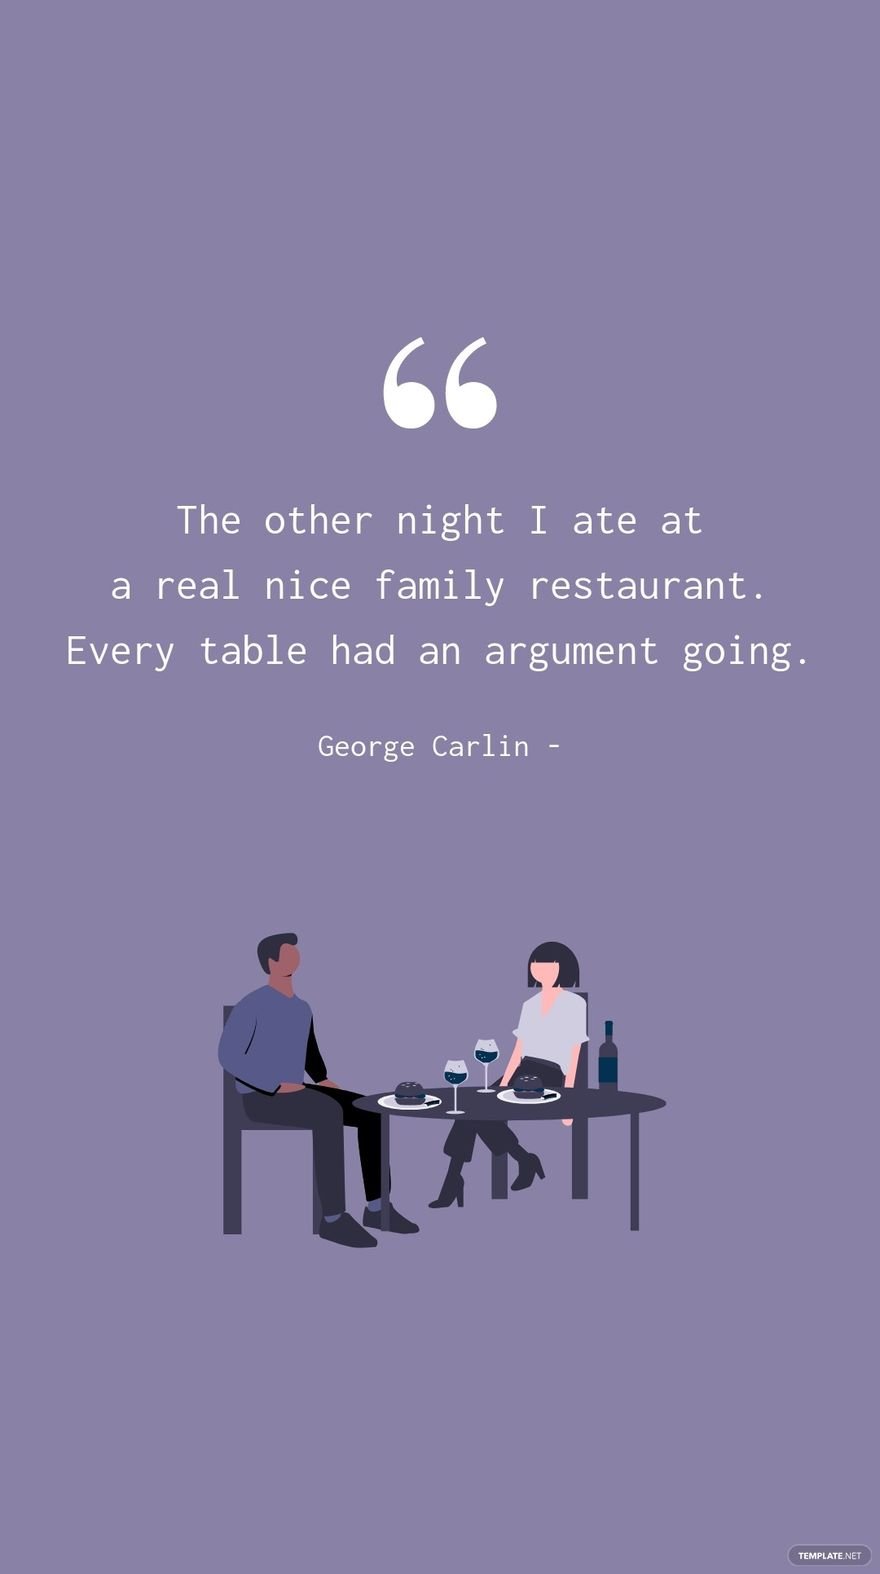 Free George Carlin - The other night I ate at a real nice family restaurant. Every table had an argument going.